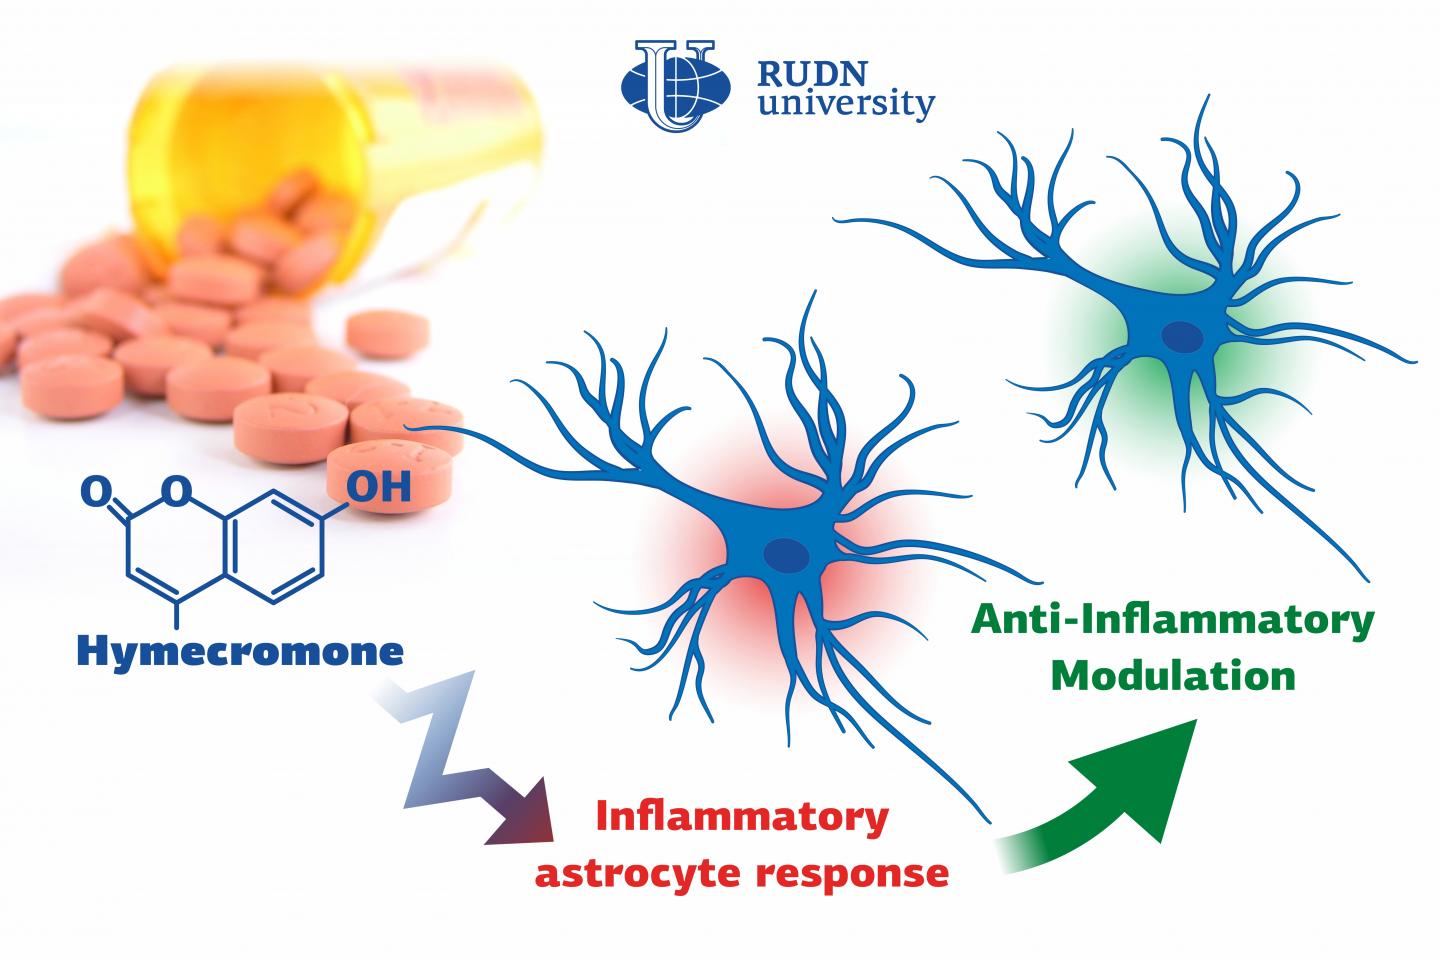 Biologists from RUDN University Suggested a New Substance to Suppress Neuroinflammation